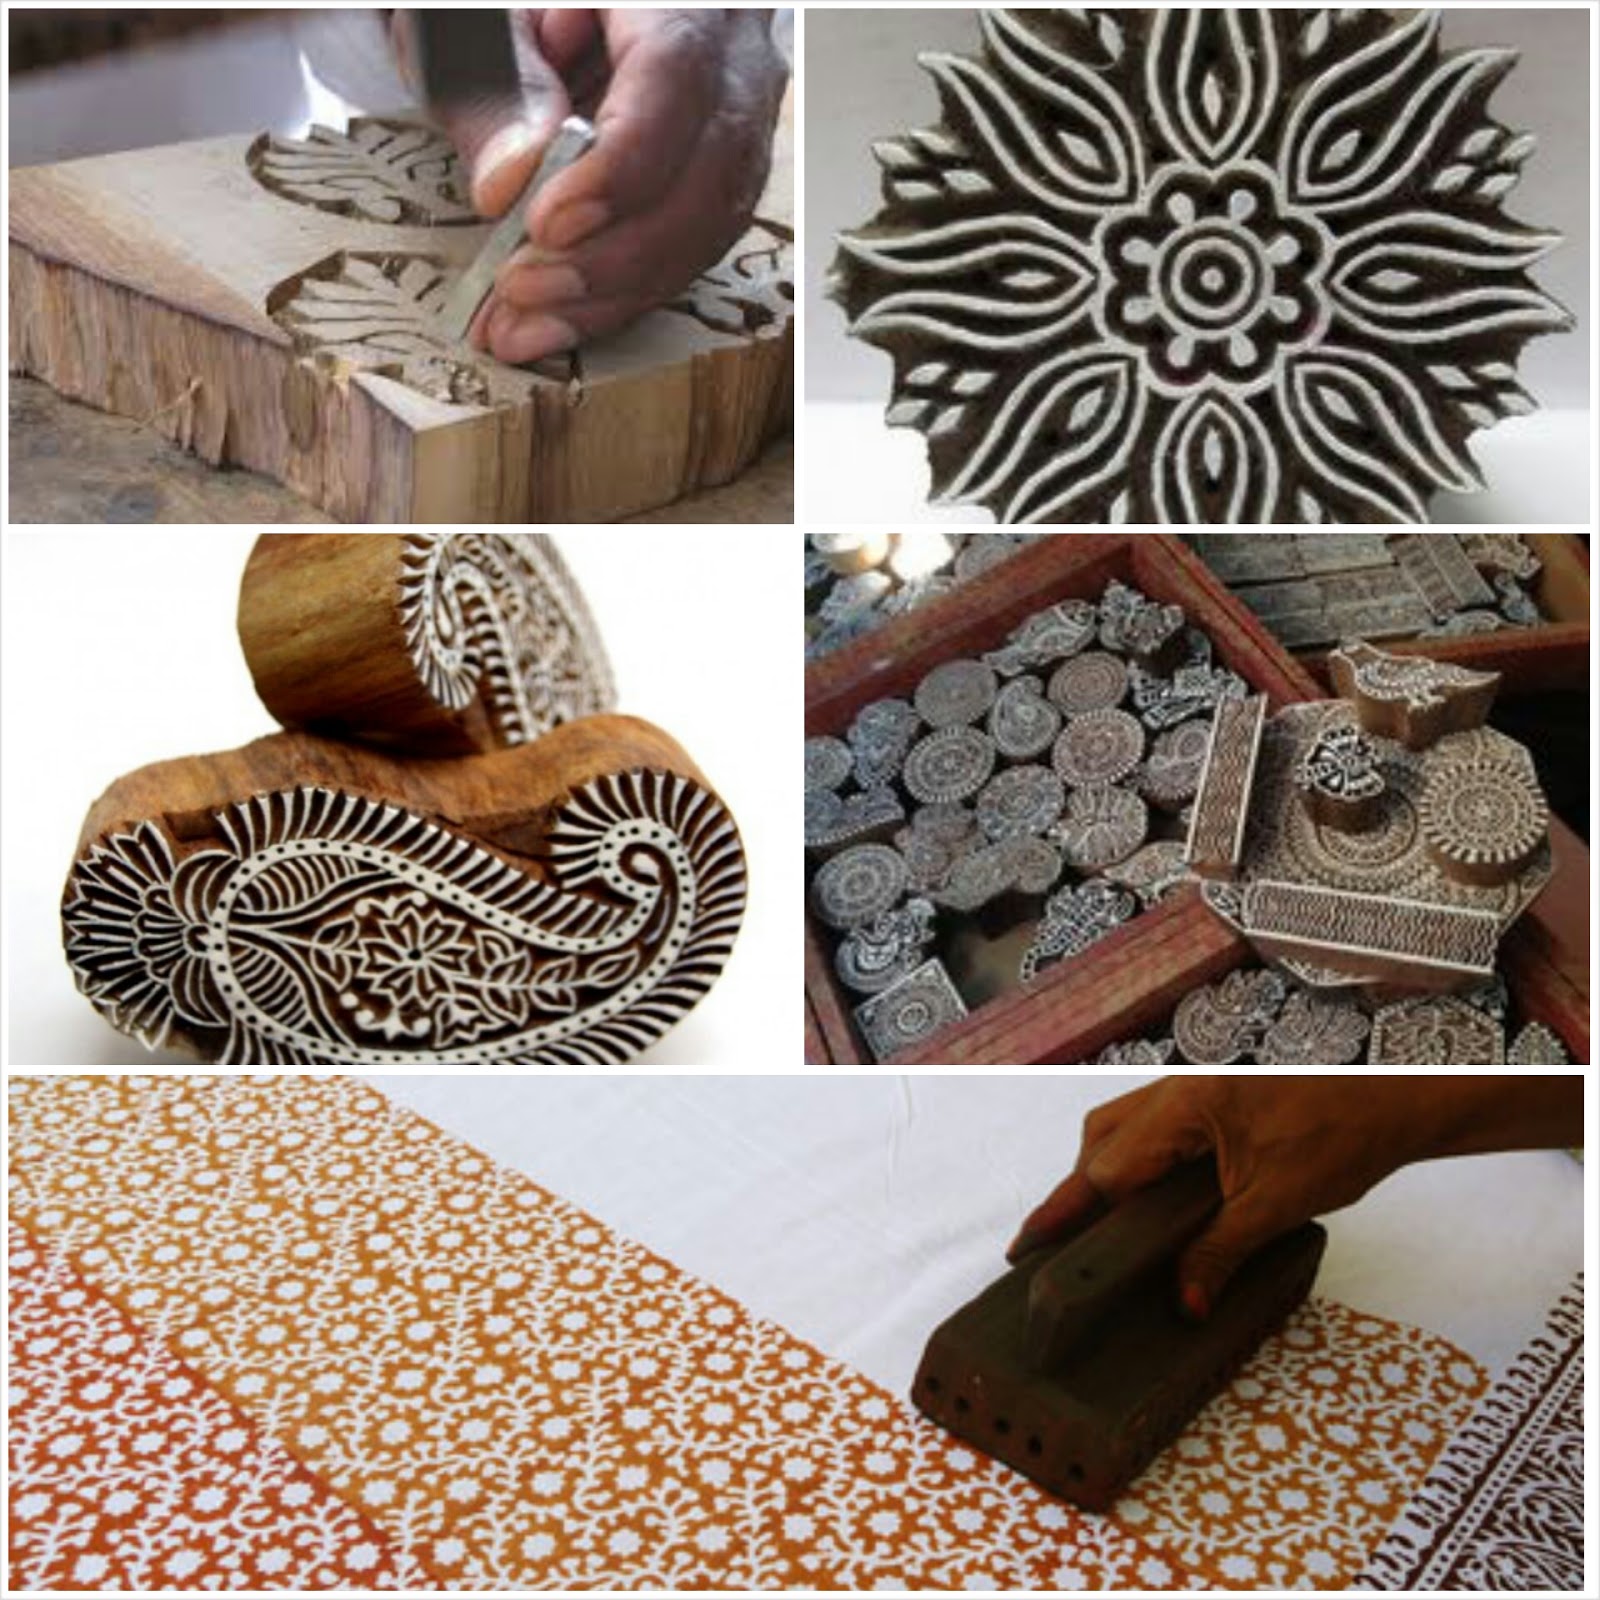 living-traditions-of-india-hand-block-printed-fabrics-enigmatic-india